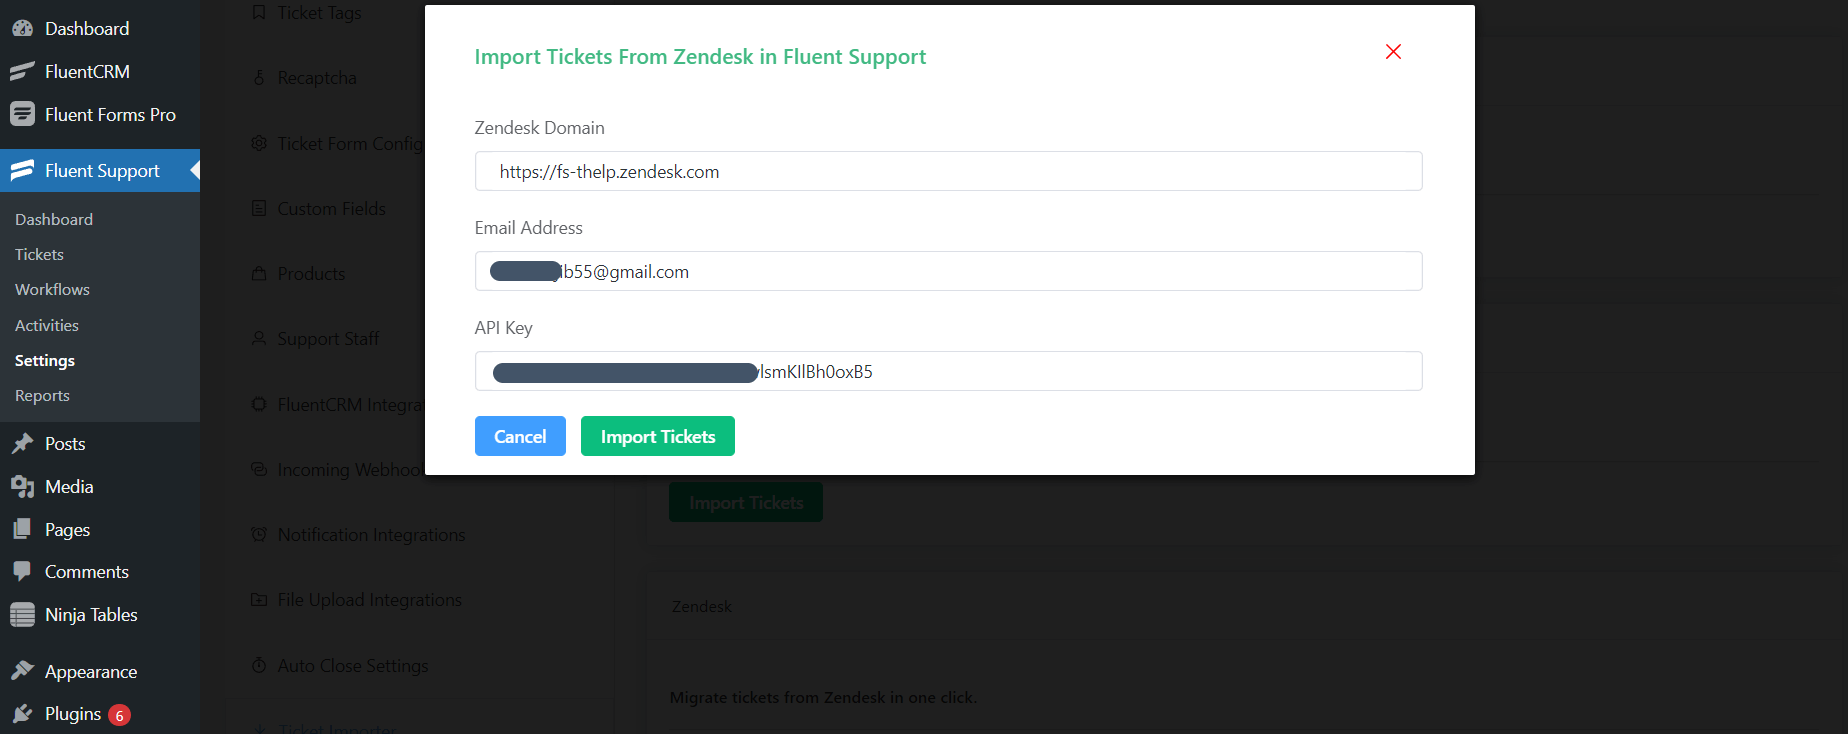 Import Tickets from Zendesk to Fluent Support